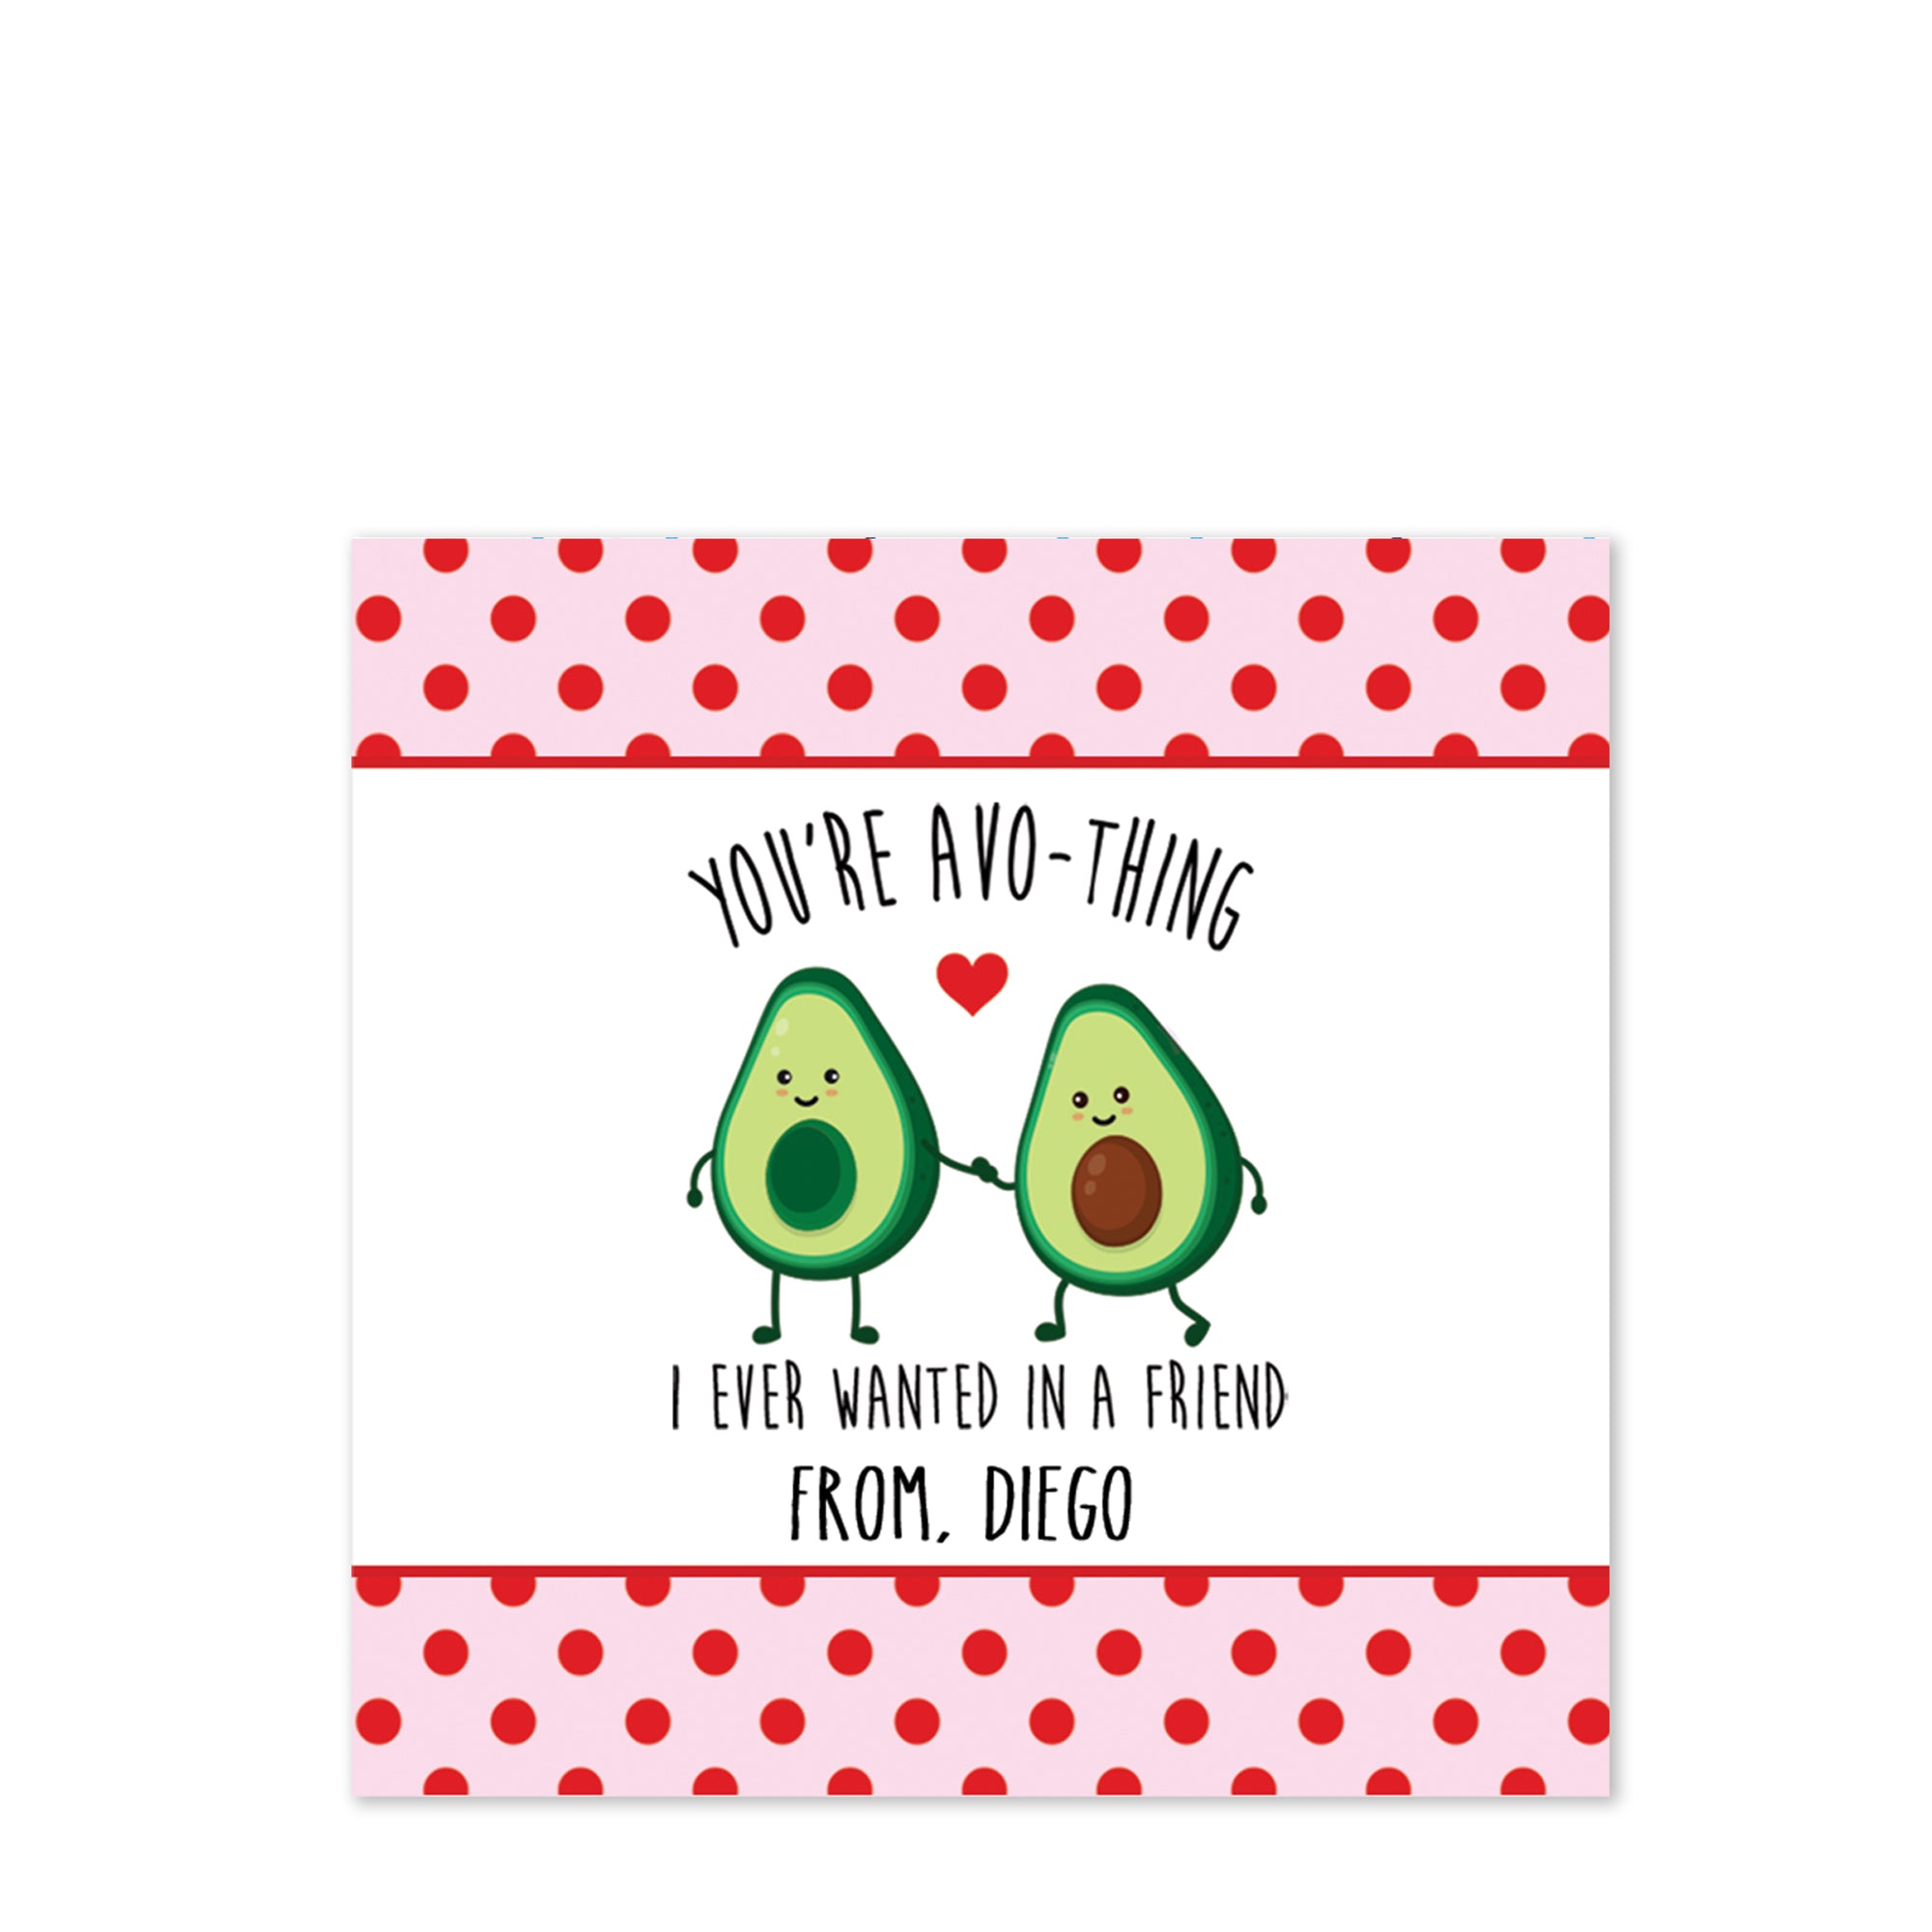 2.5" square sticker for favor bags